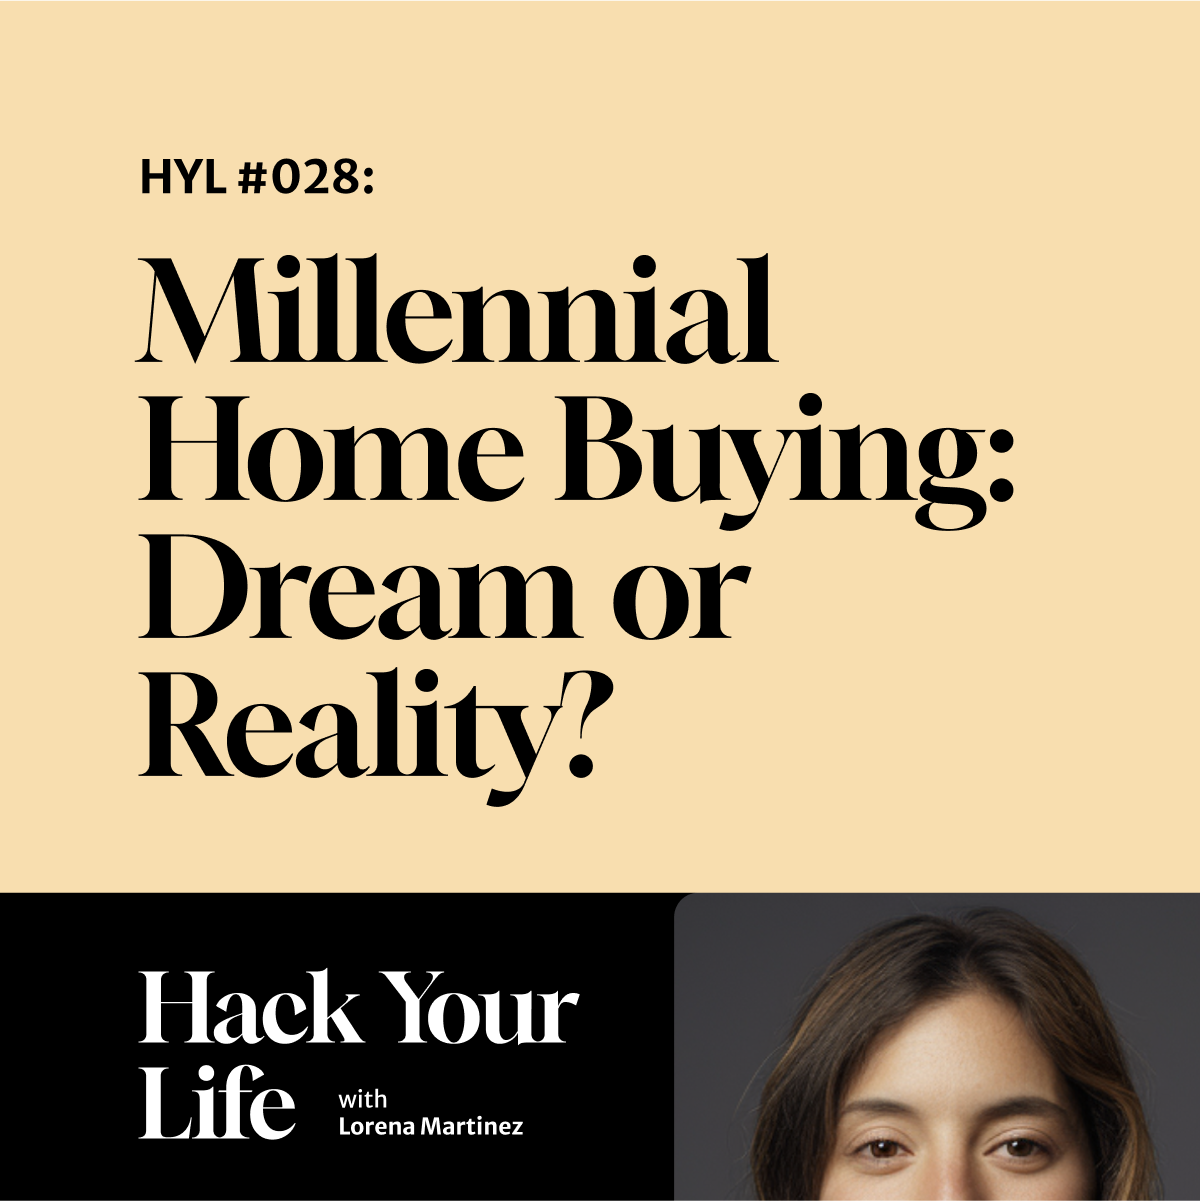 HYL #028: Millennial Home Buying: Dream or Reality?